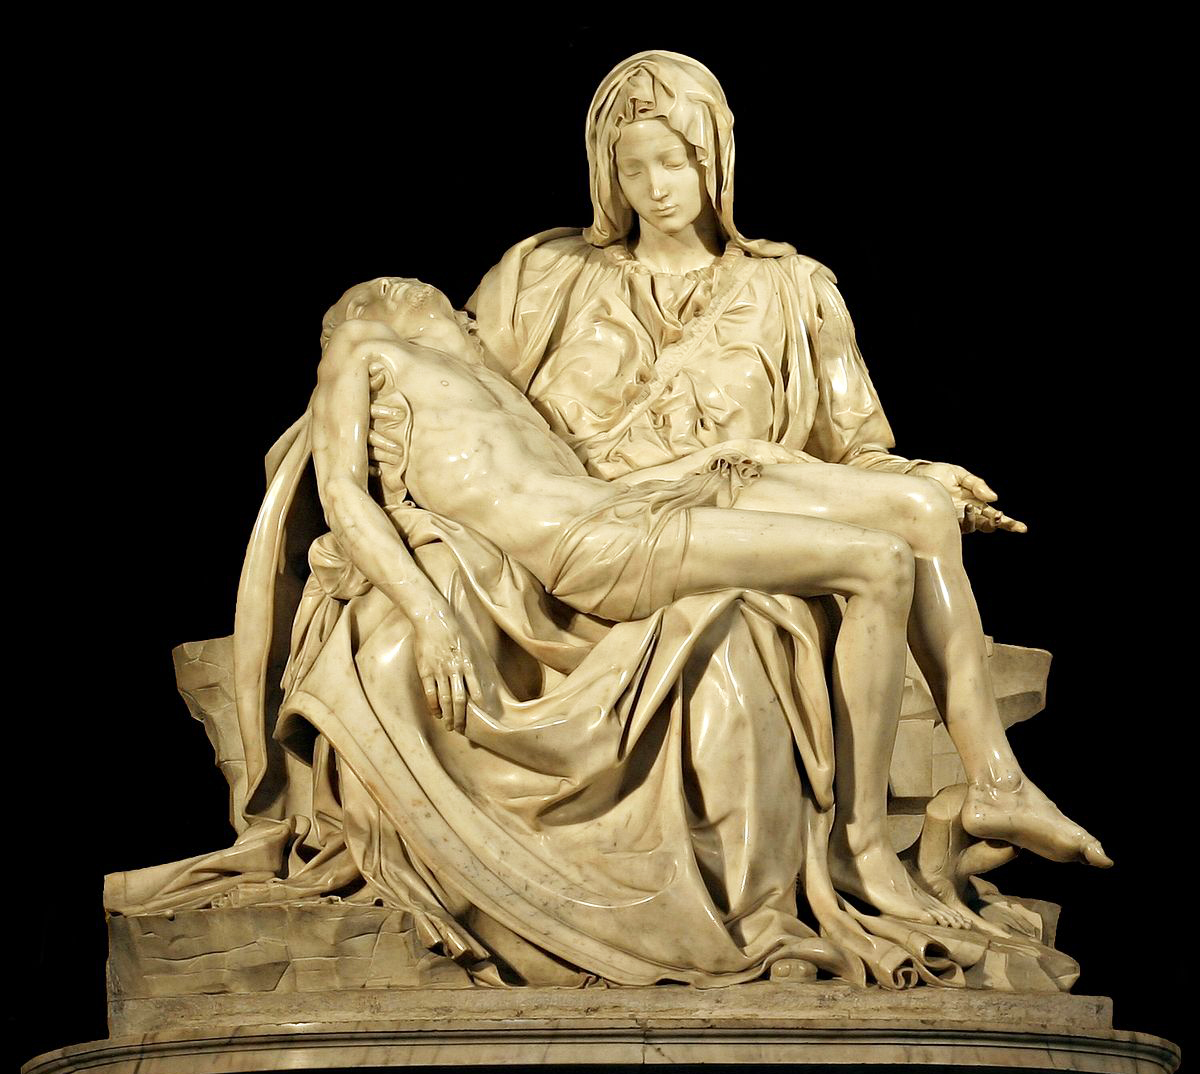 Pieta marble classical artwork, jesus and mary sculpture by michelangelo